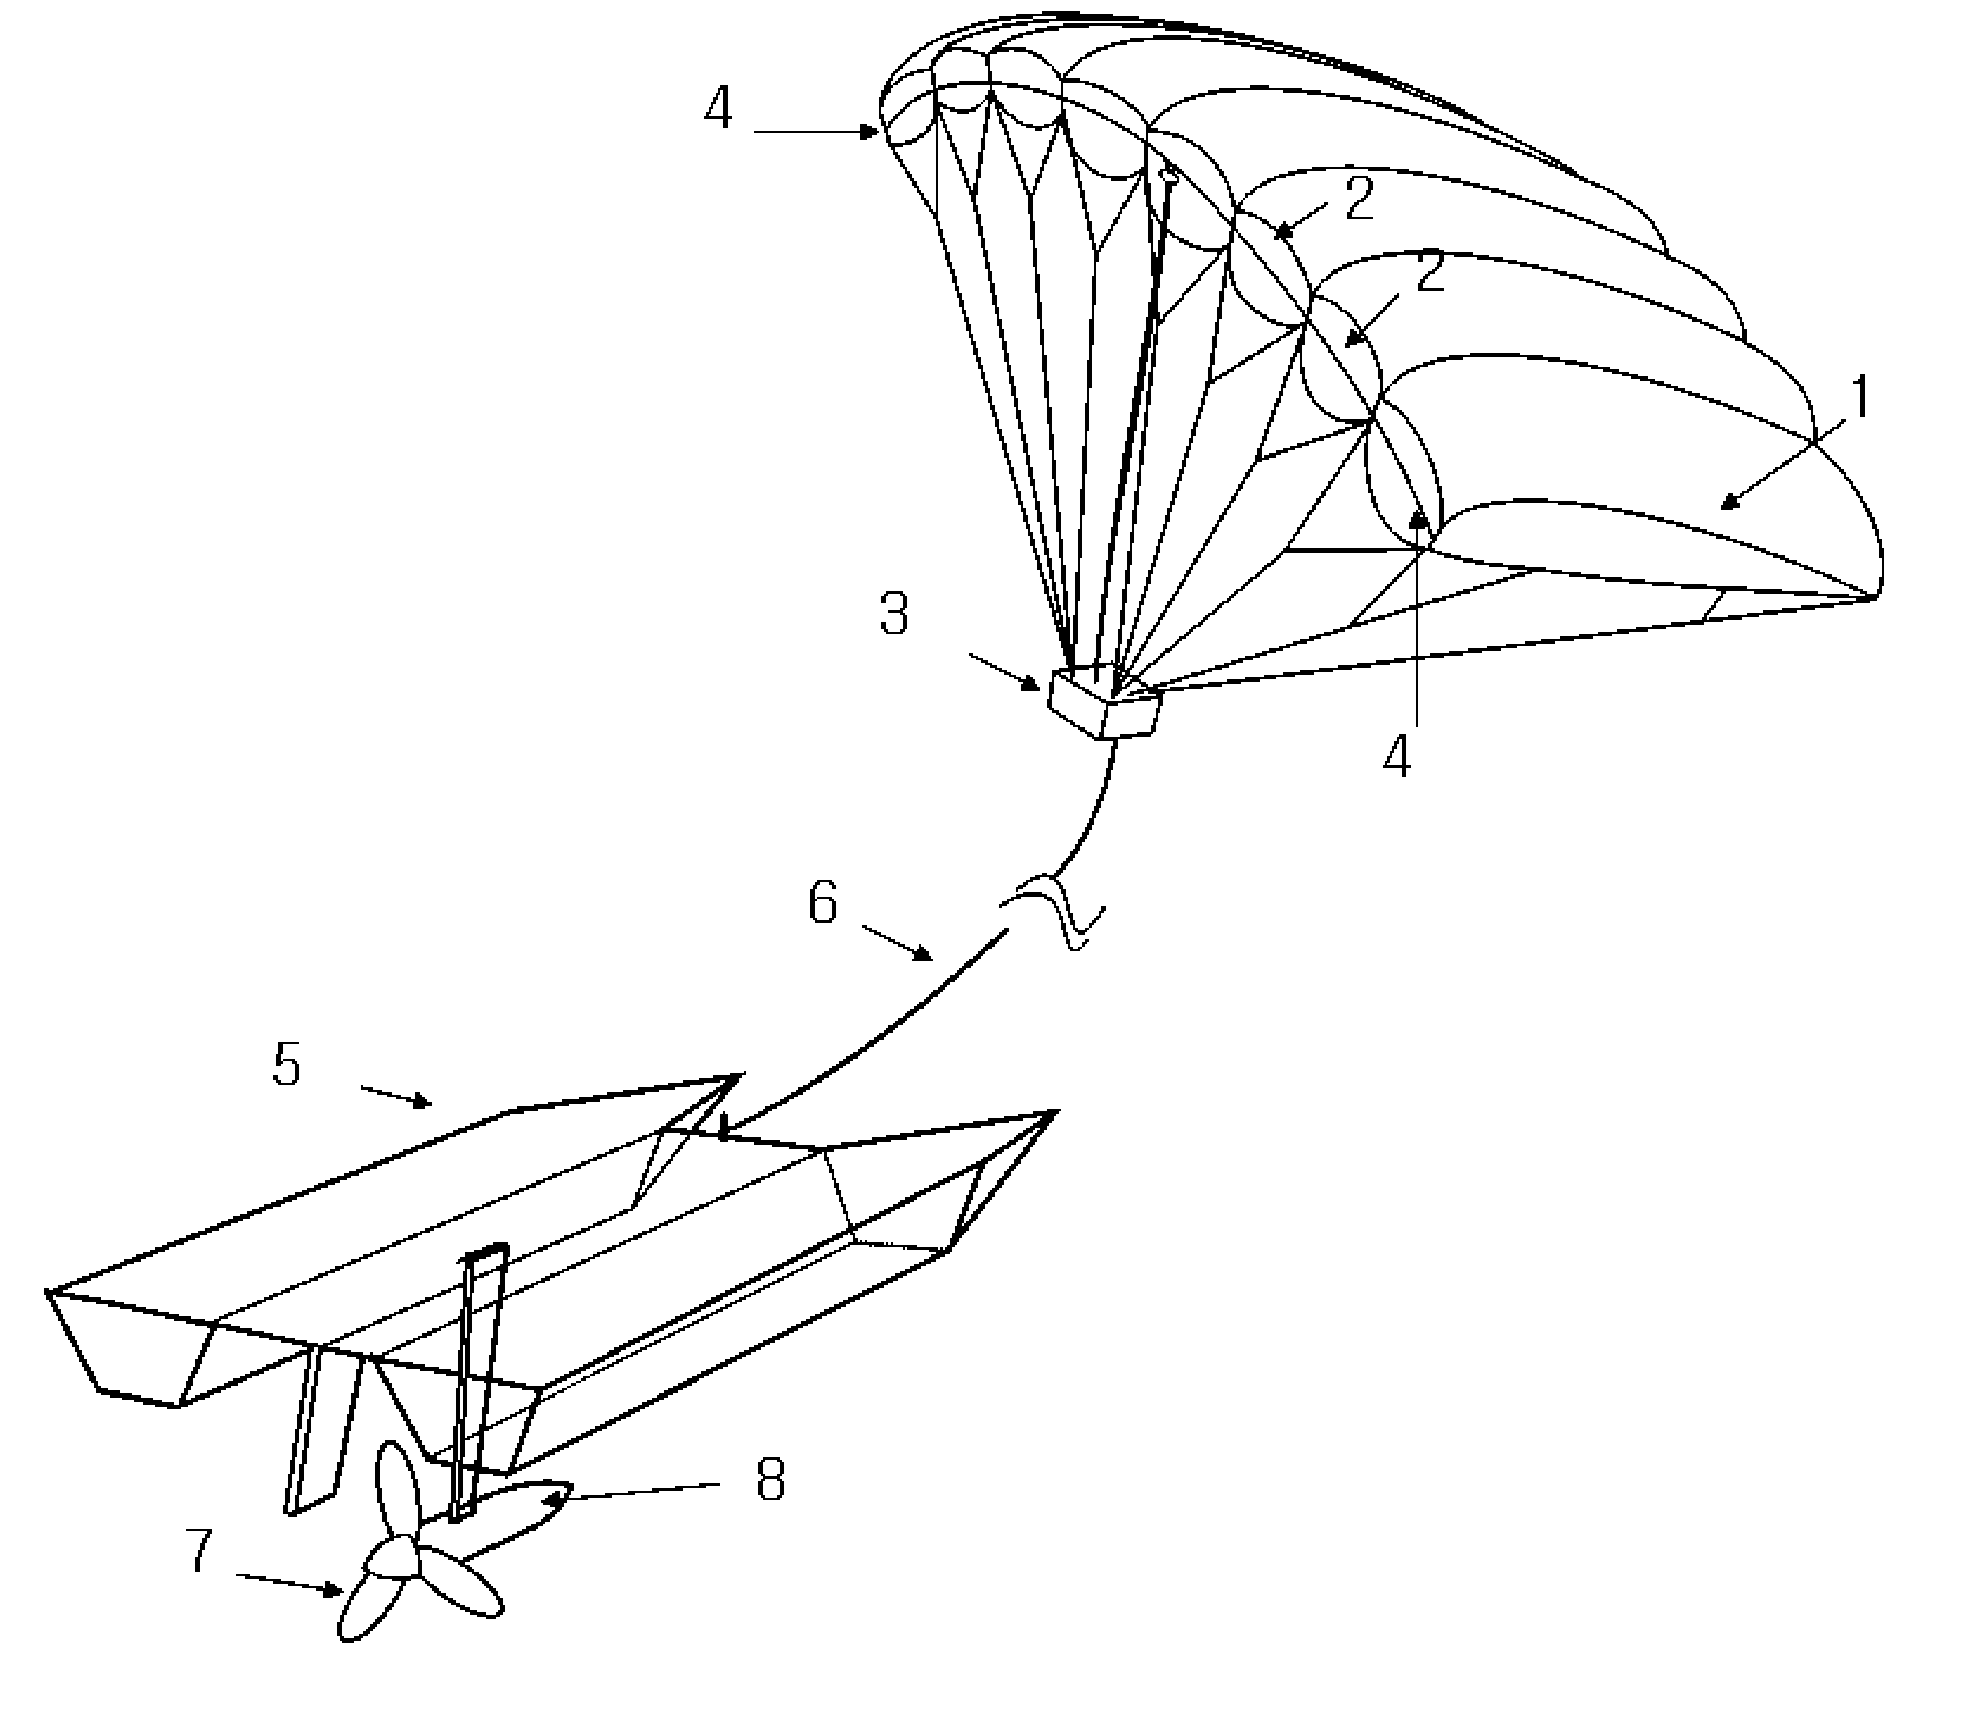 Electric Power Generation System Using Hydro Turbine Tracted by Paraglider